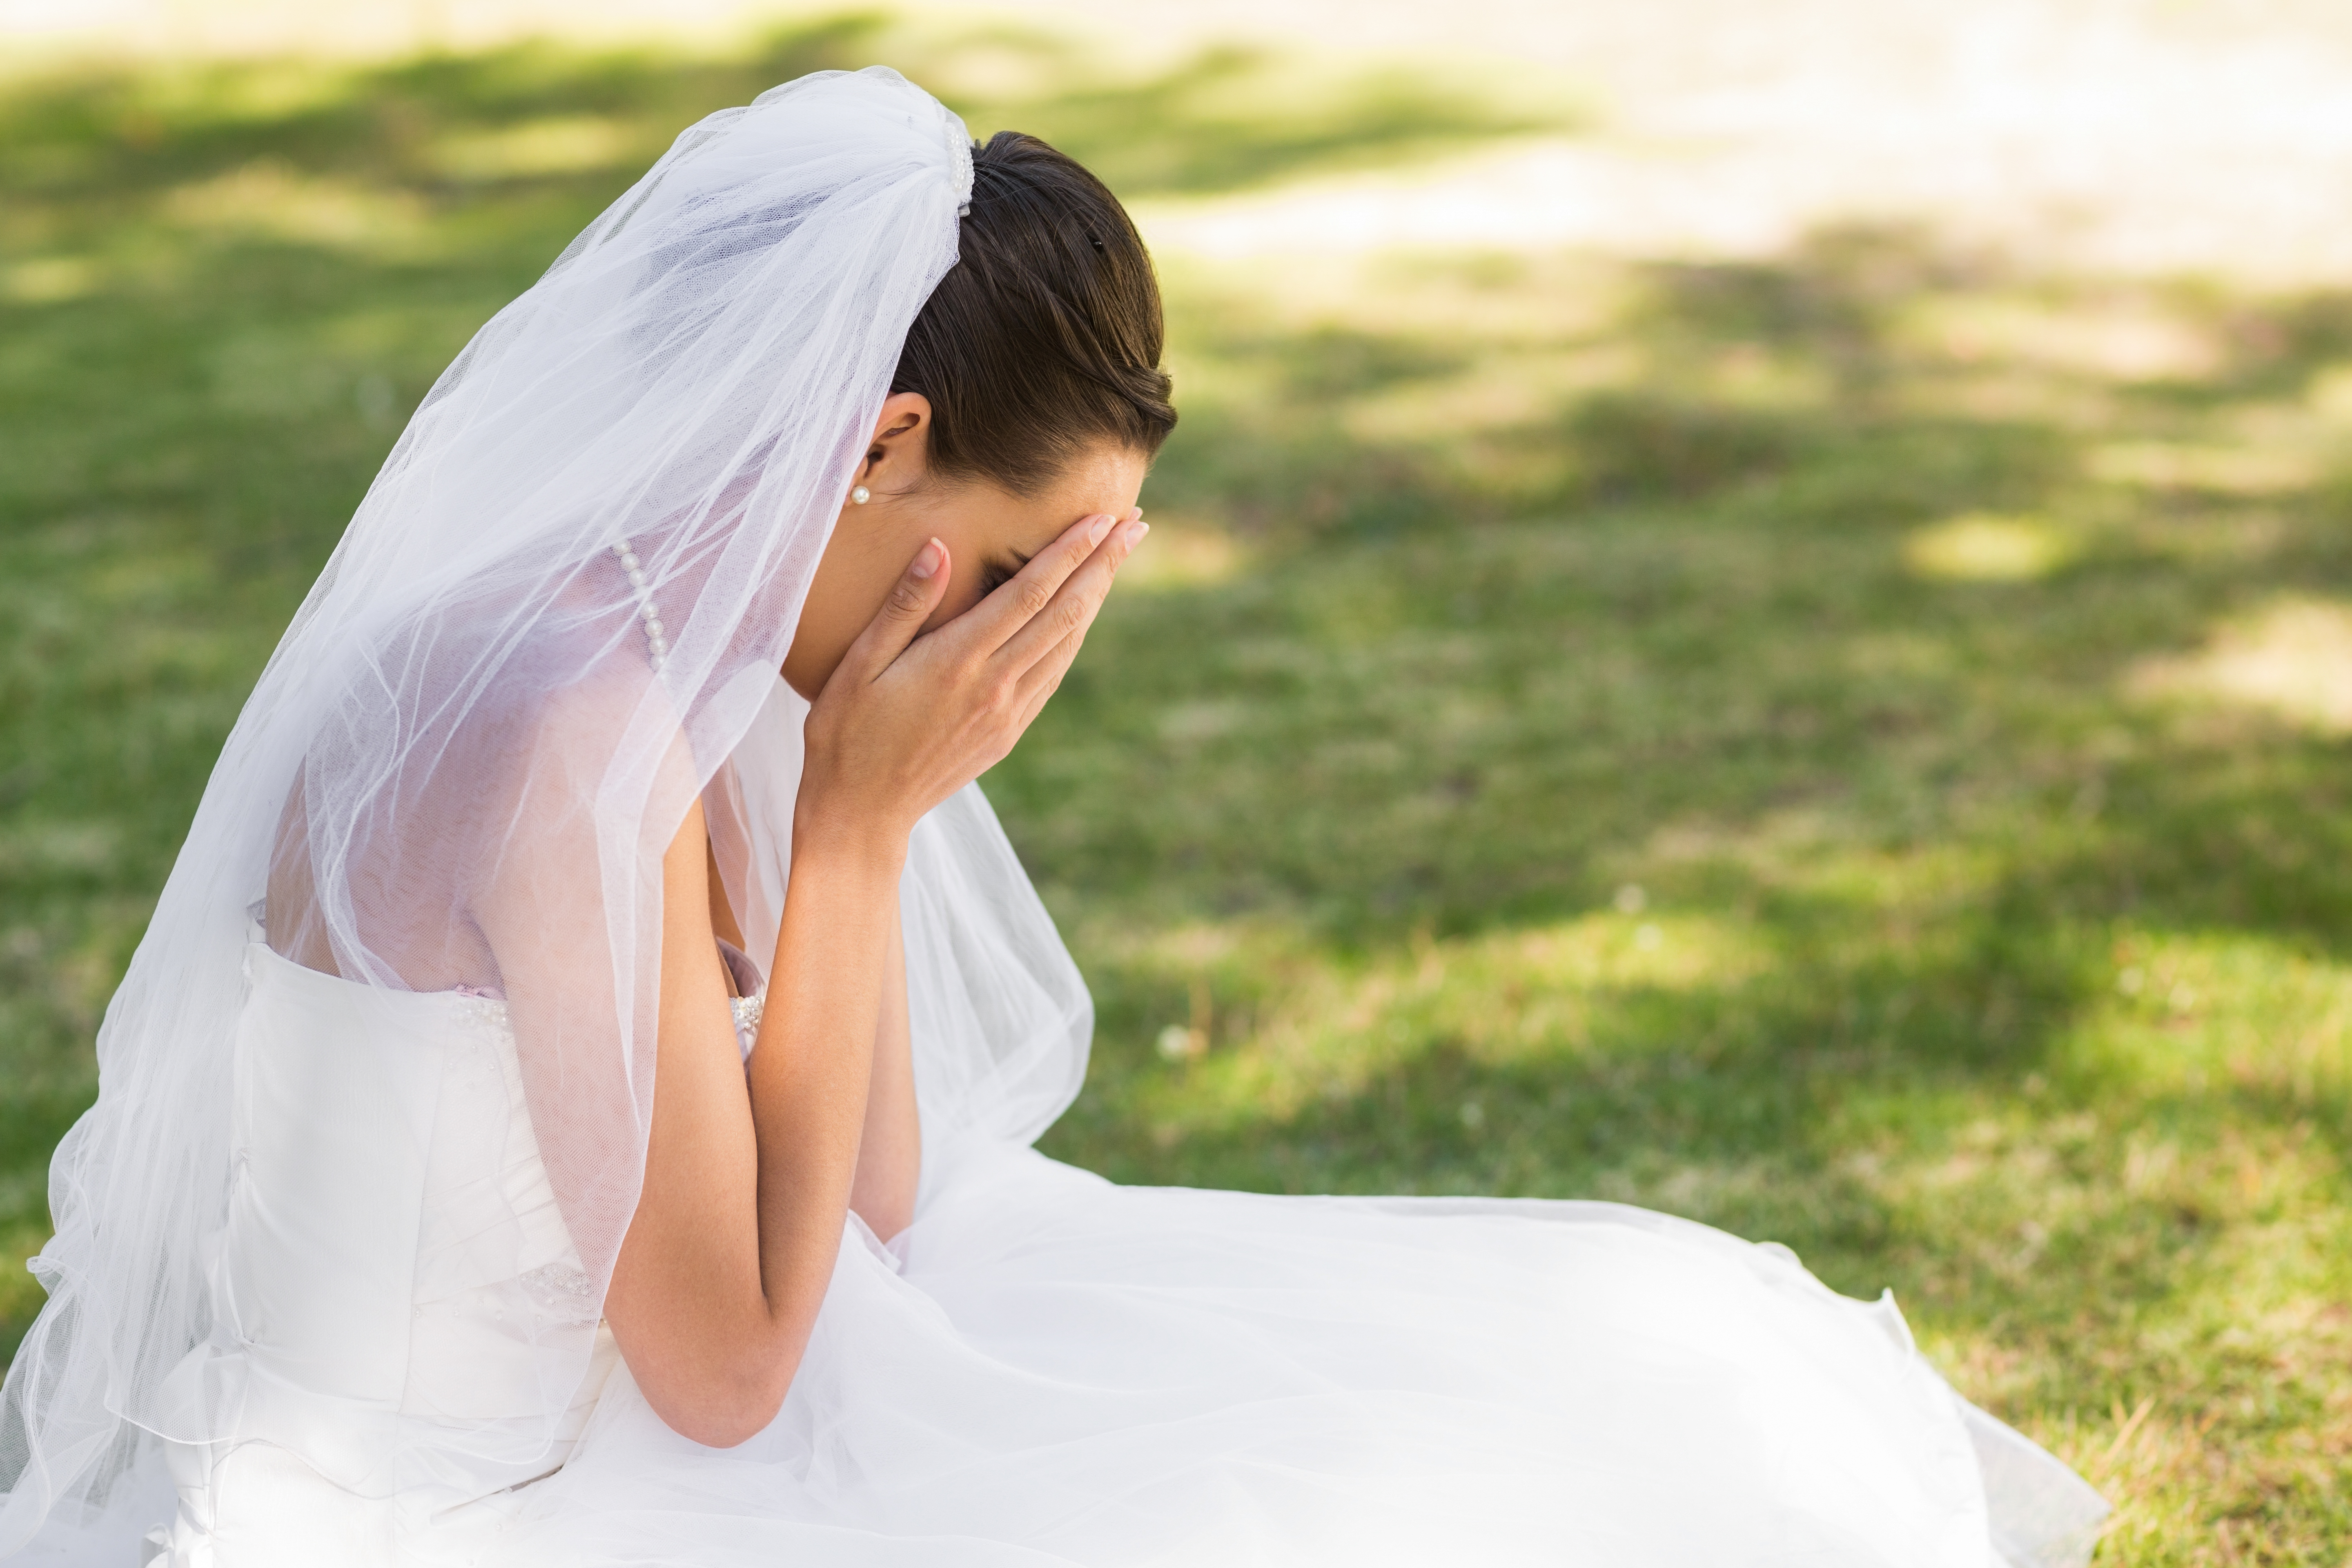 A bride crying while sitting on the ground | Source: Shutterstock